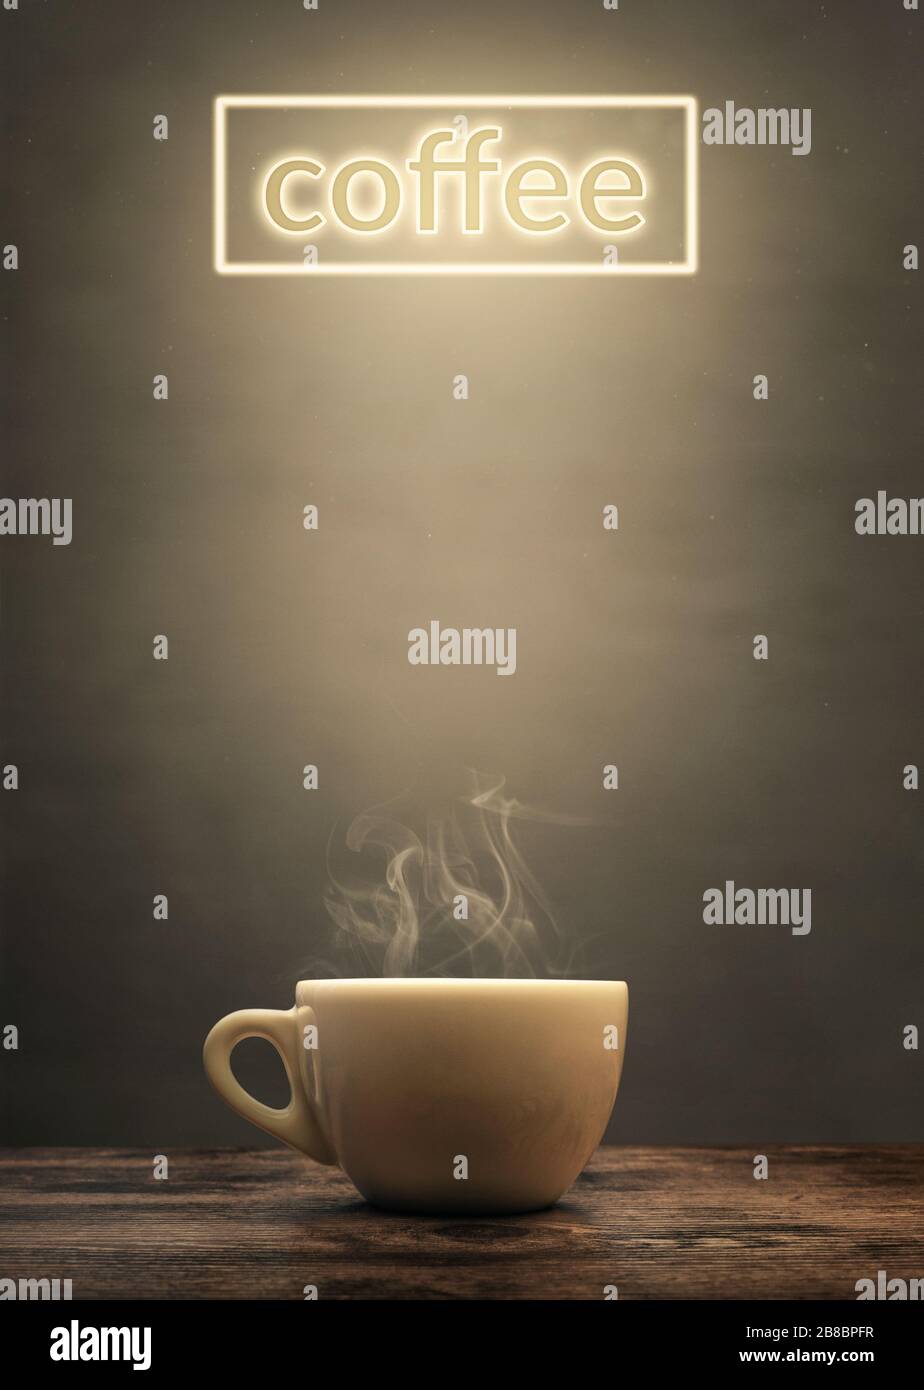 Hot coffee poster with copy space Stock Photo